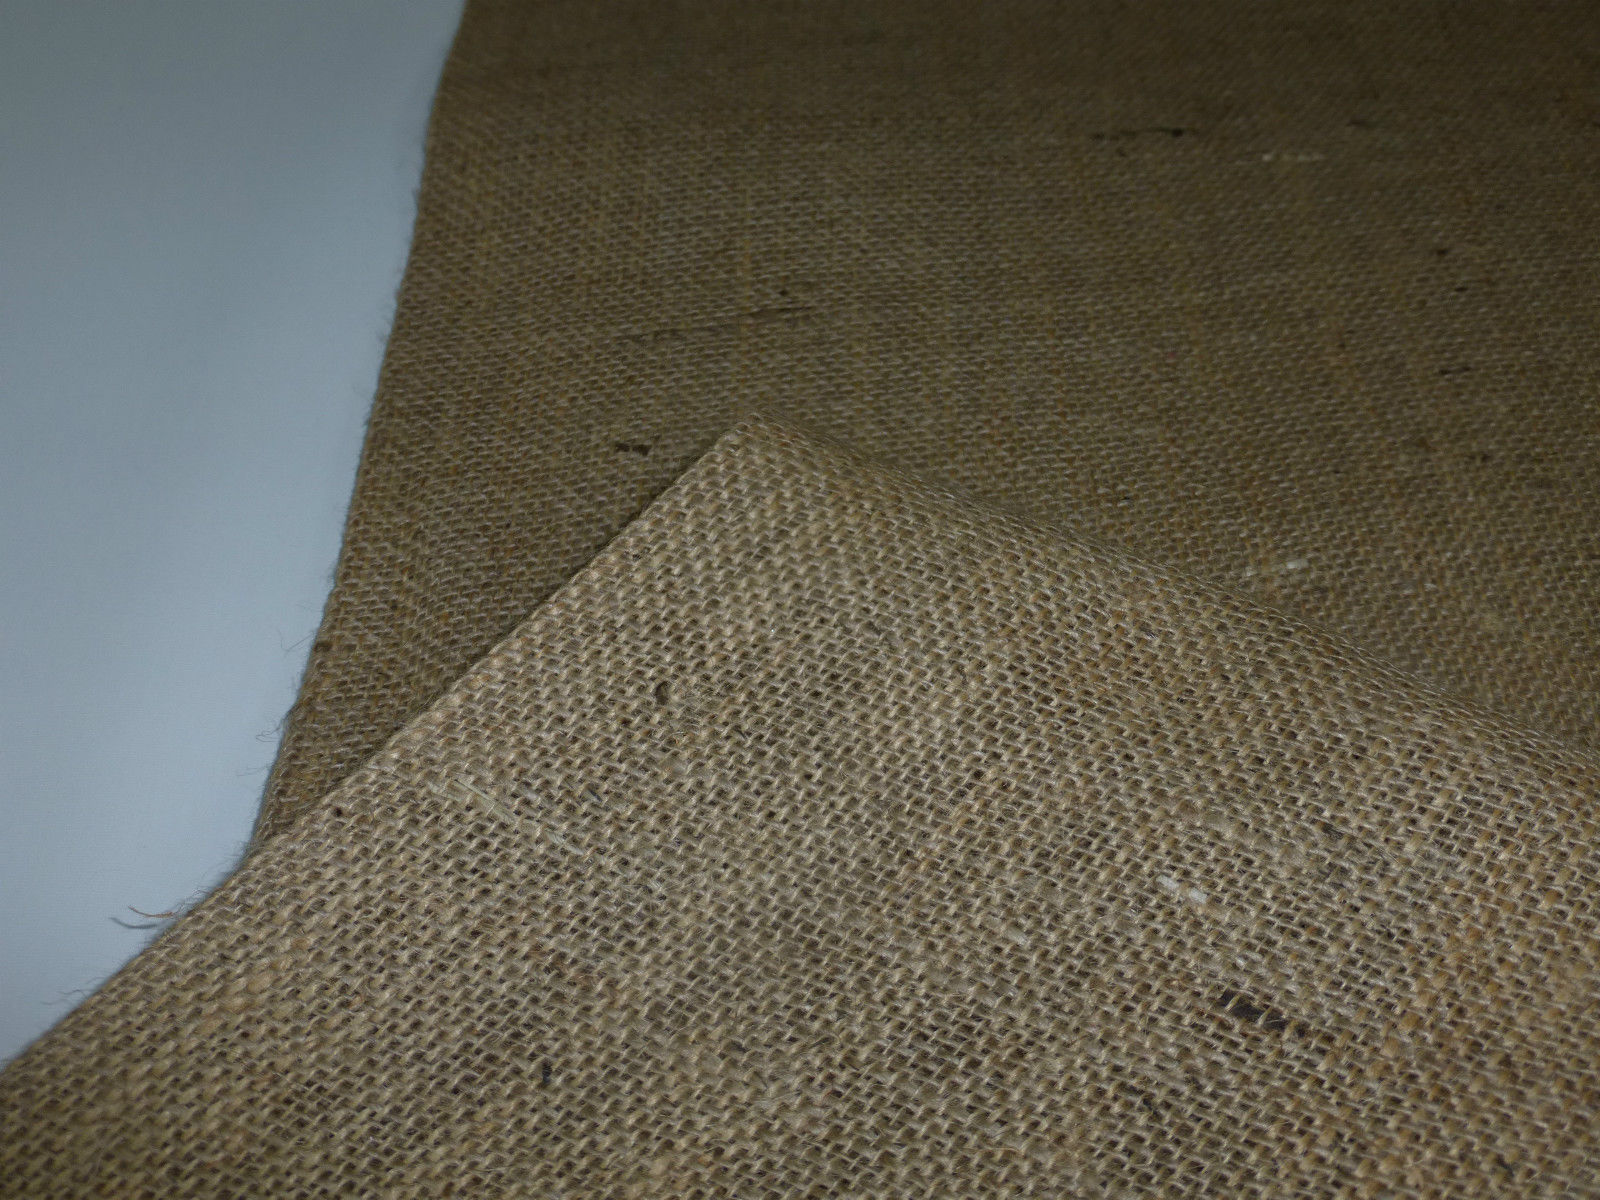 burlap cloth UPHOLSTERY SUPPLIES 20 mtr roll hessian 36" wide natural hessian 